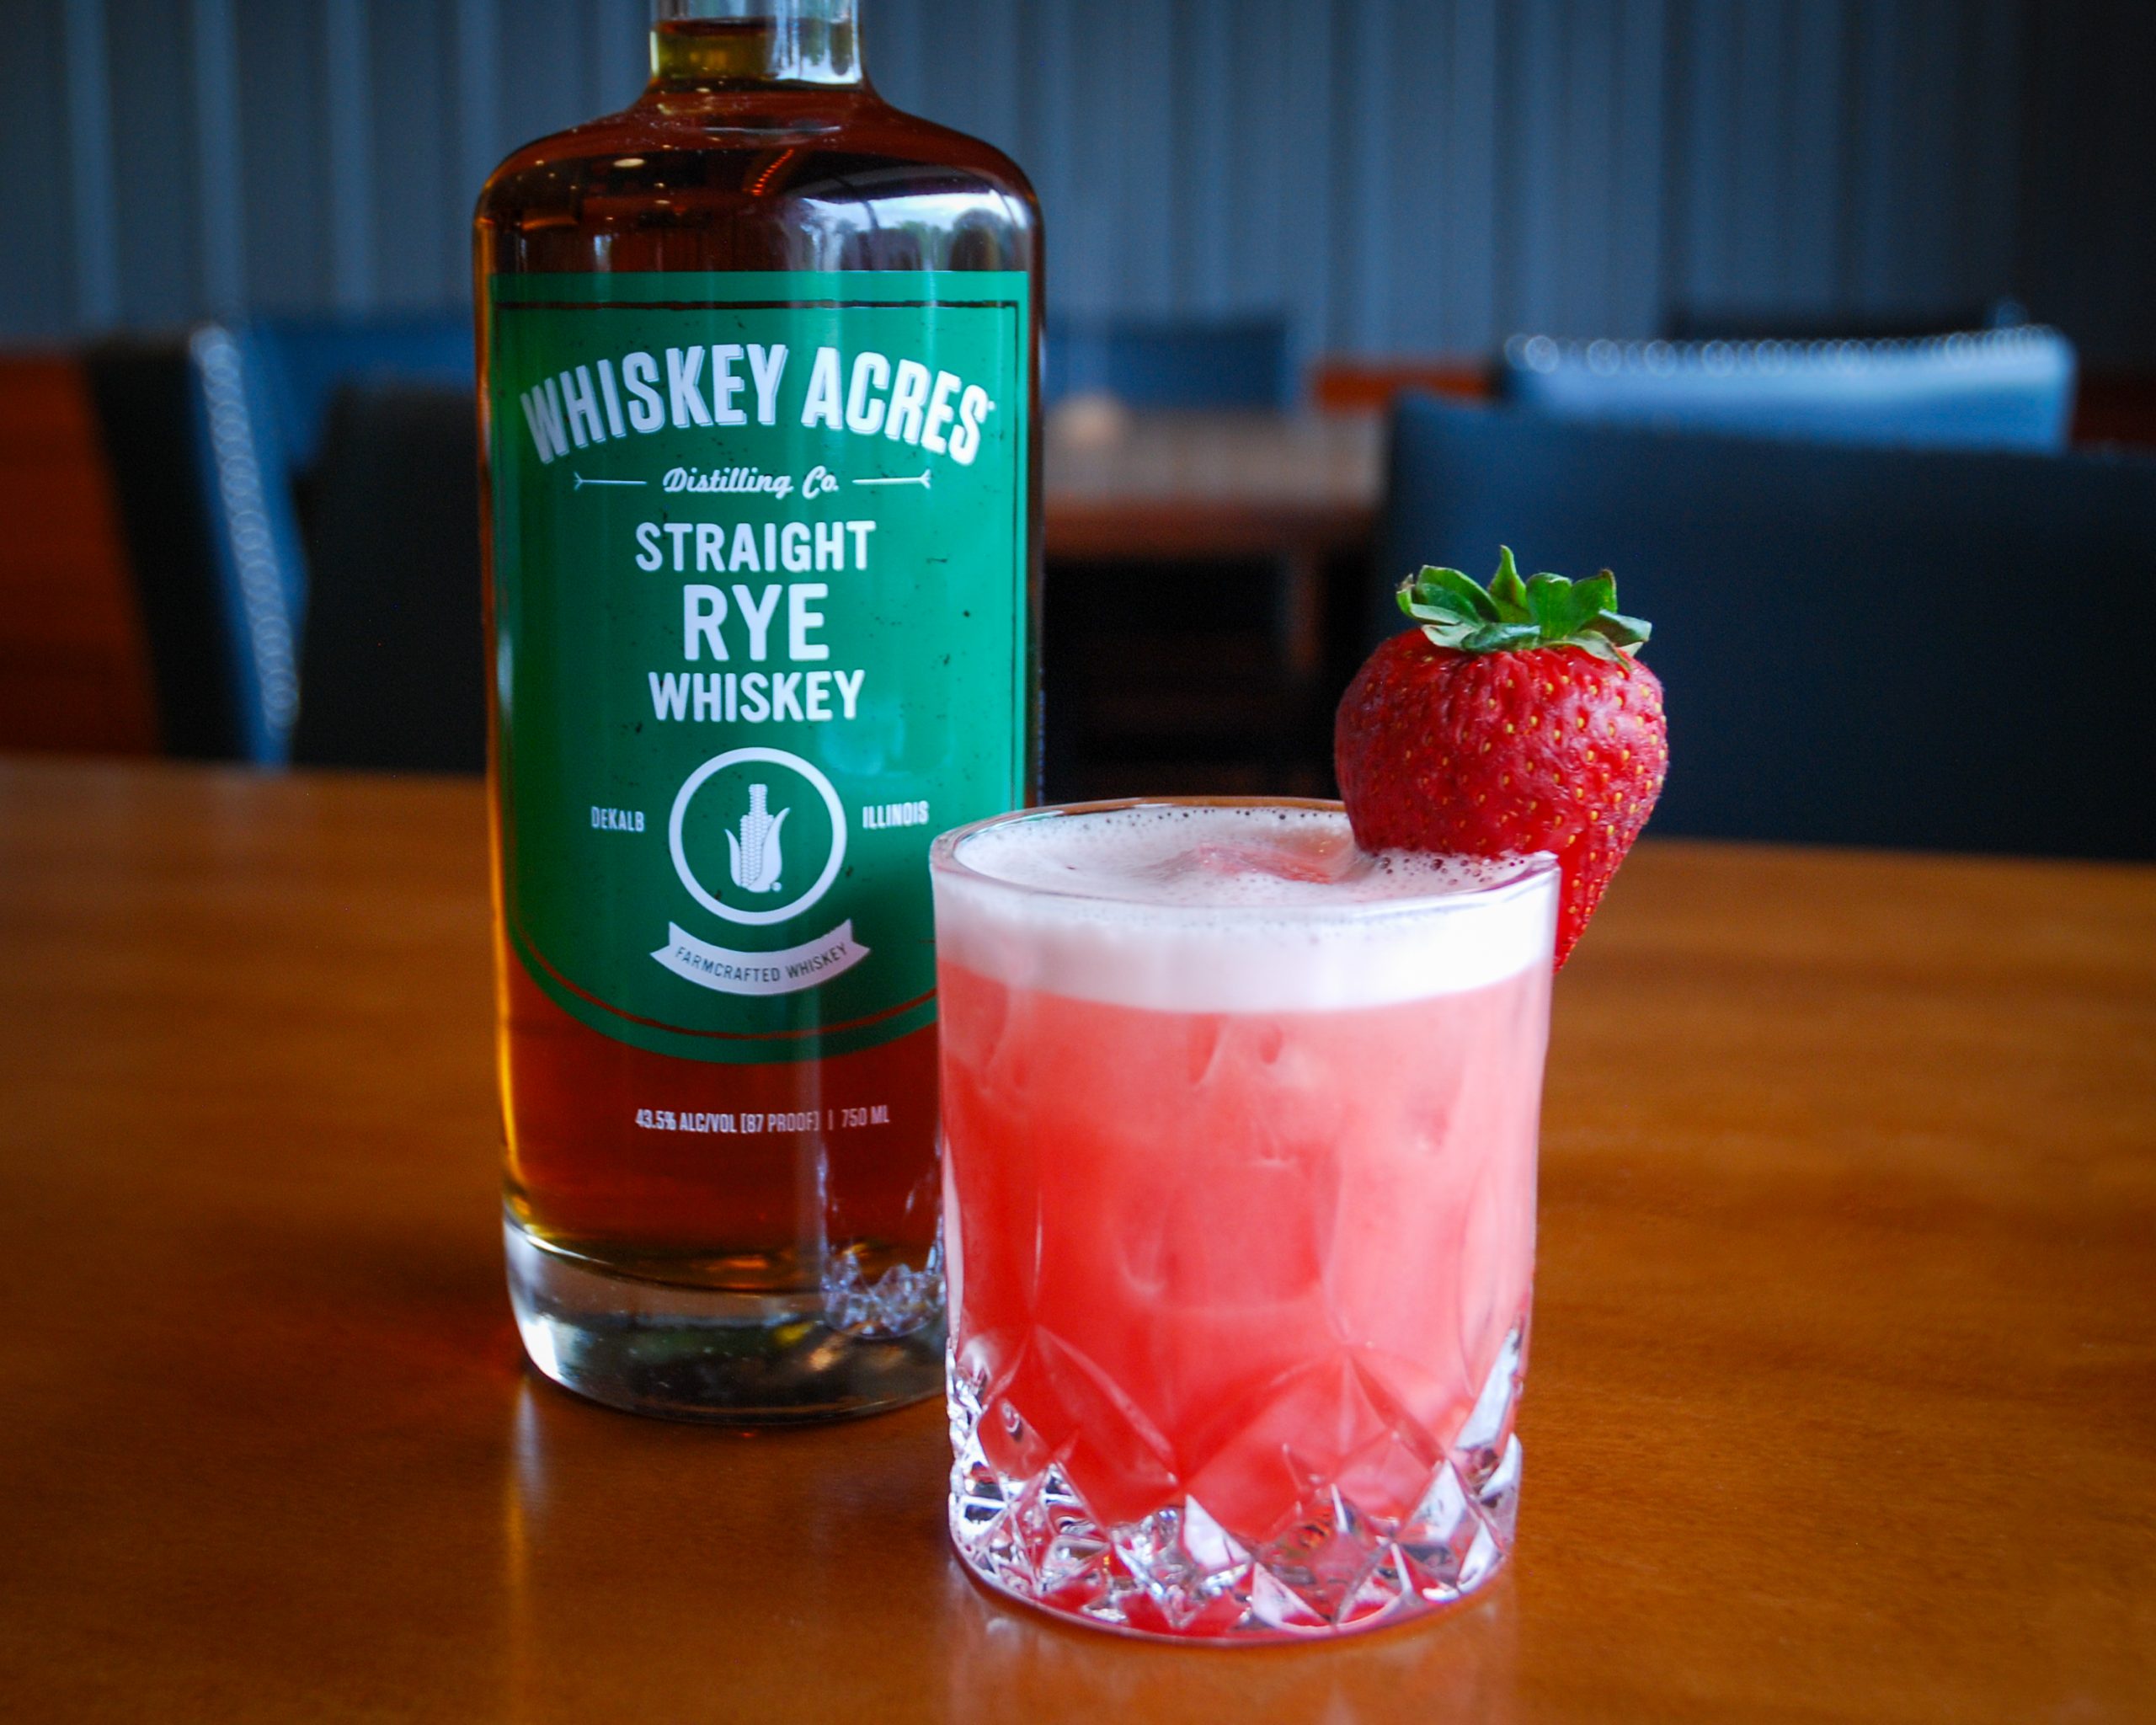 Cocktails - Strawberry Whiskey Sour with Whiskey Acres